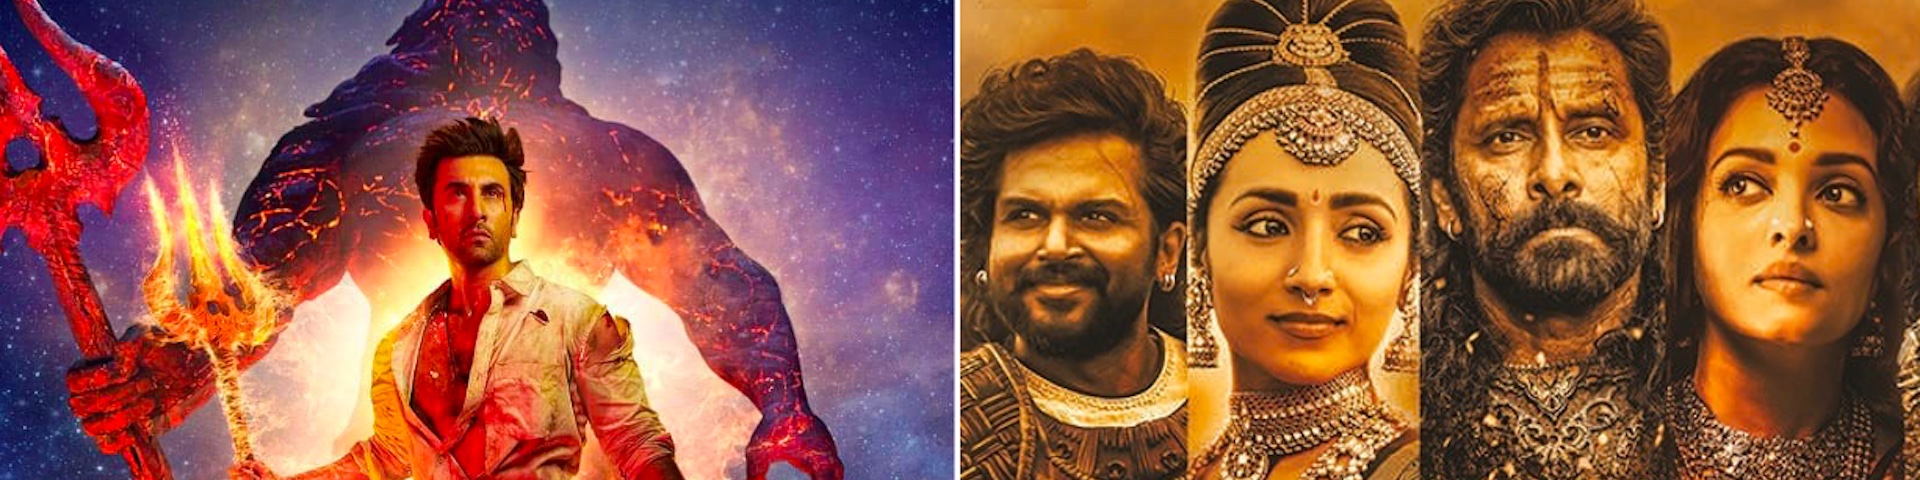 The India Box Office Report: September 2022